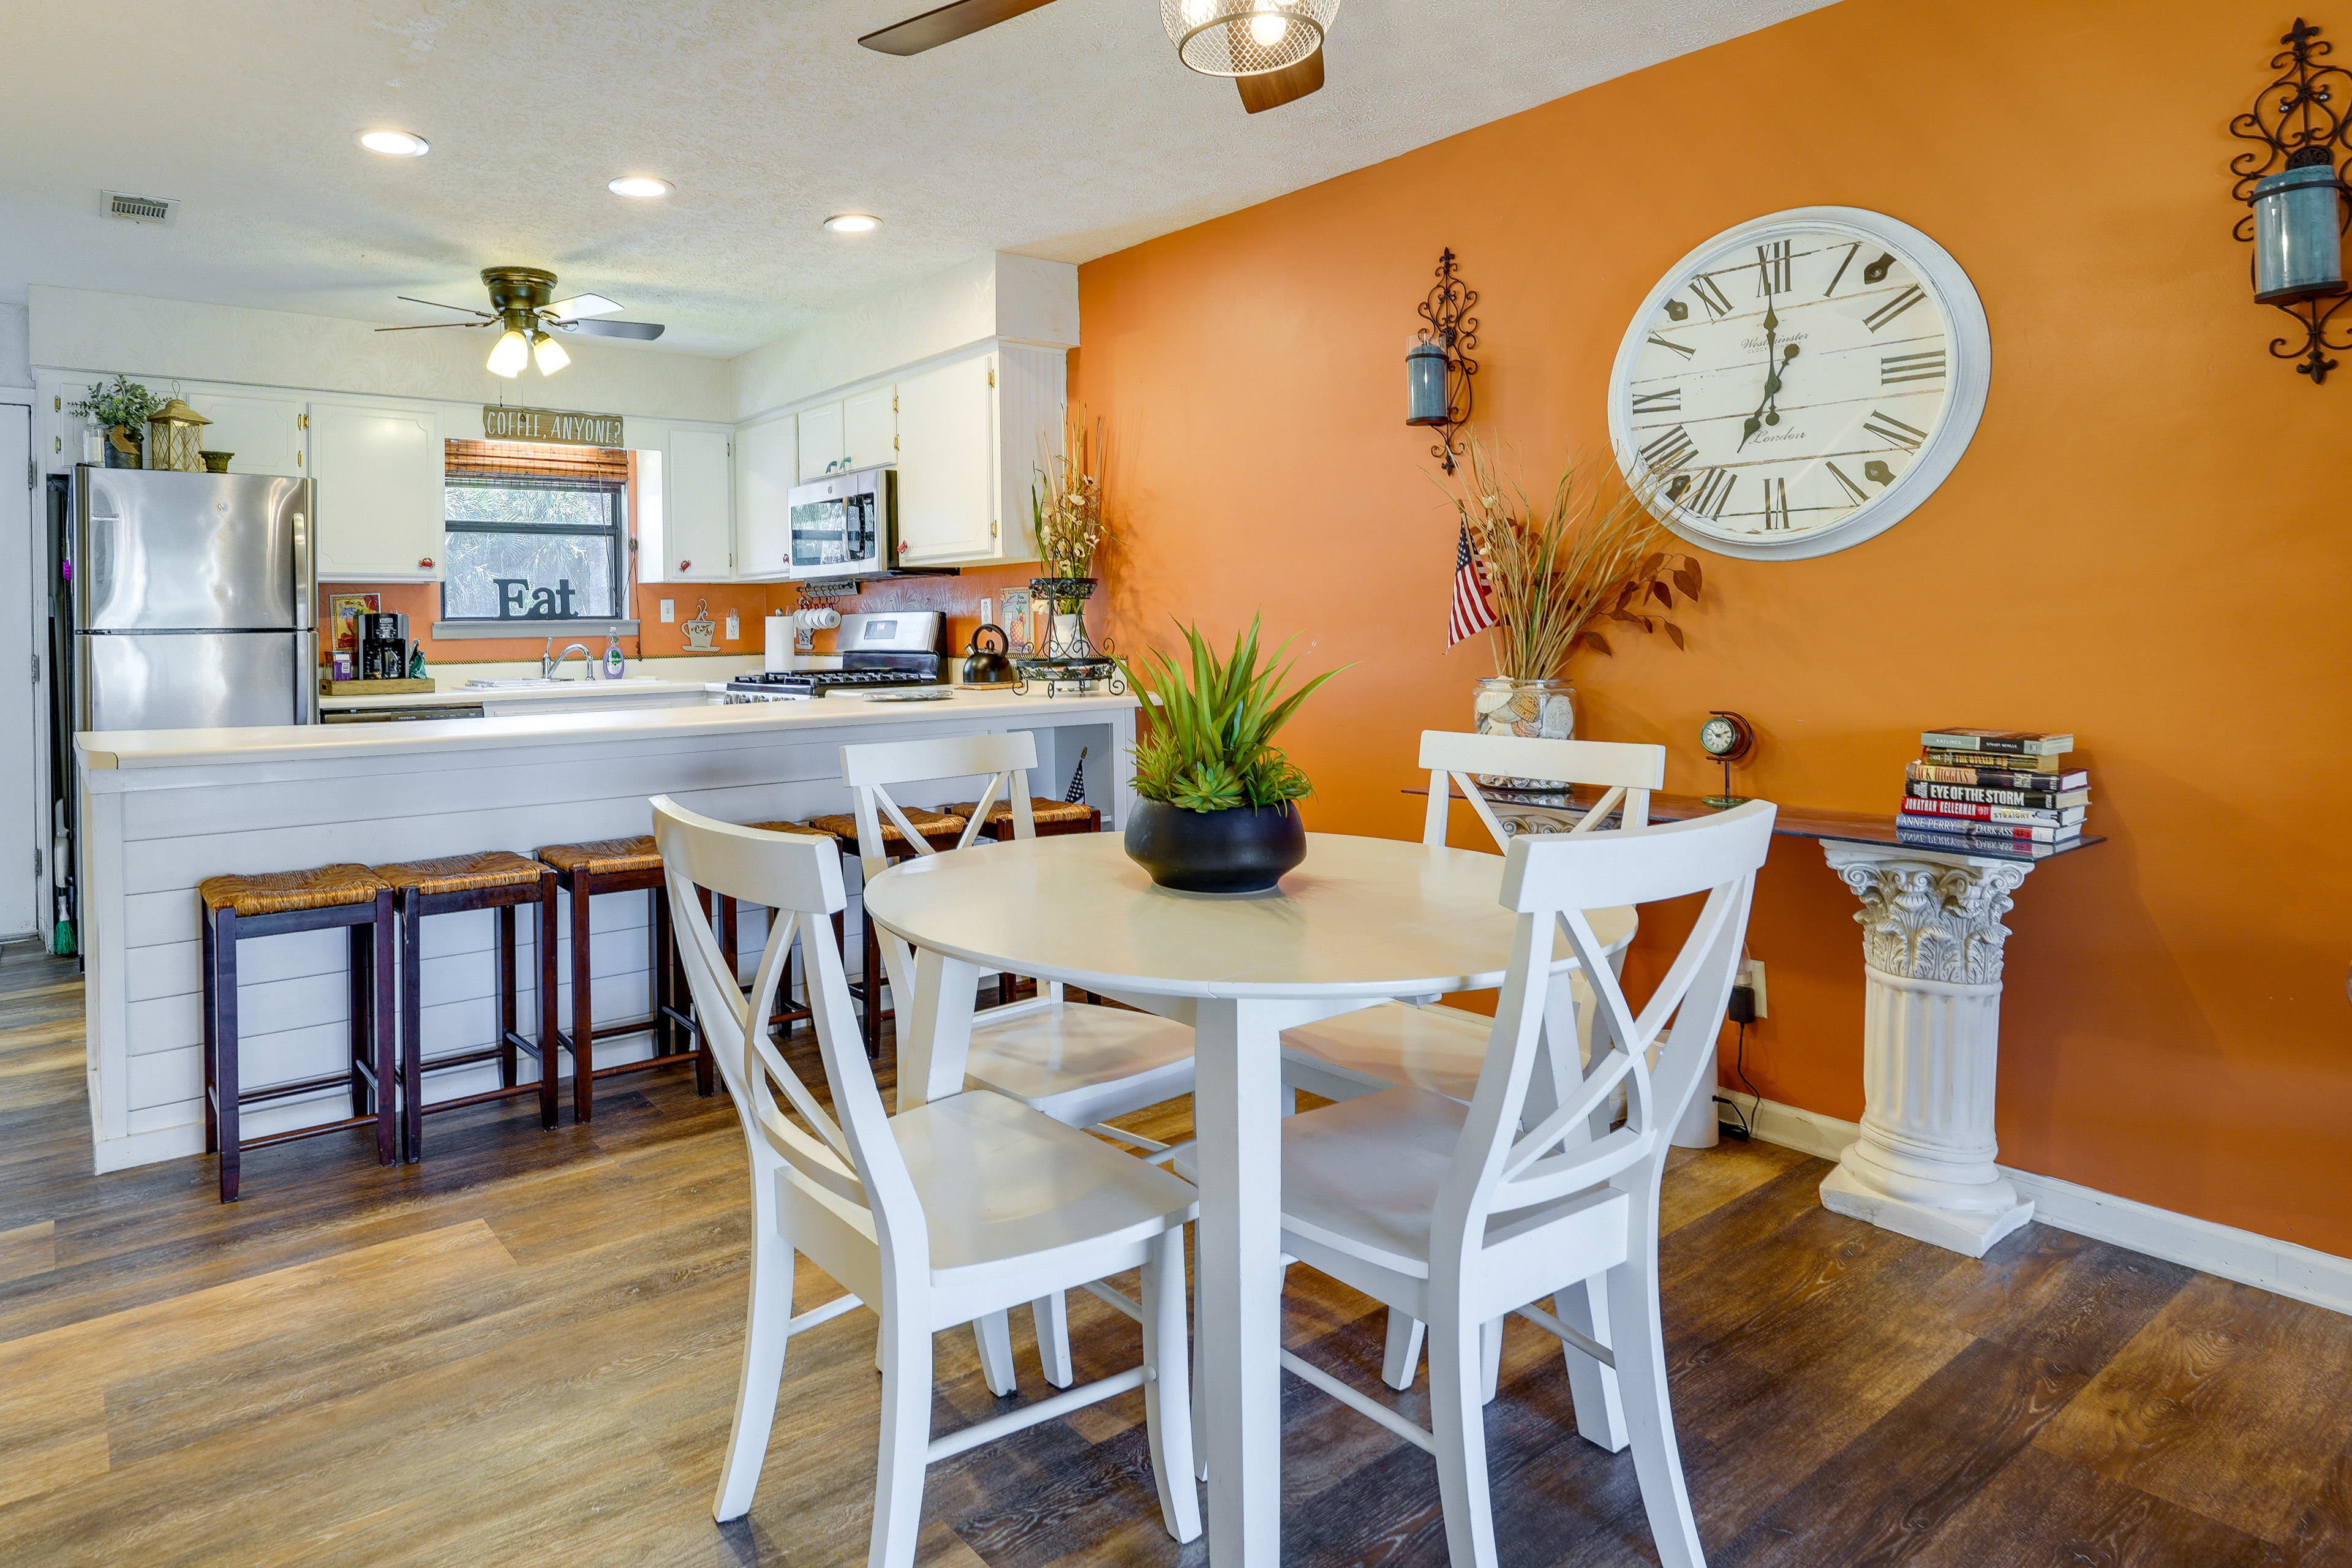 Kitchen & Dining Area | Gated Community